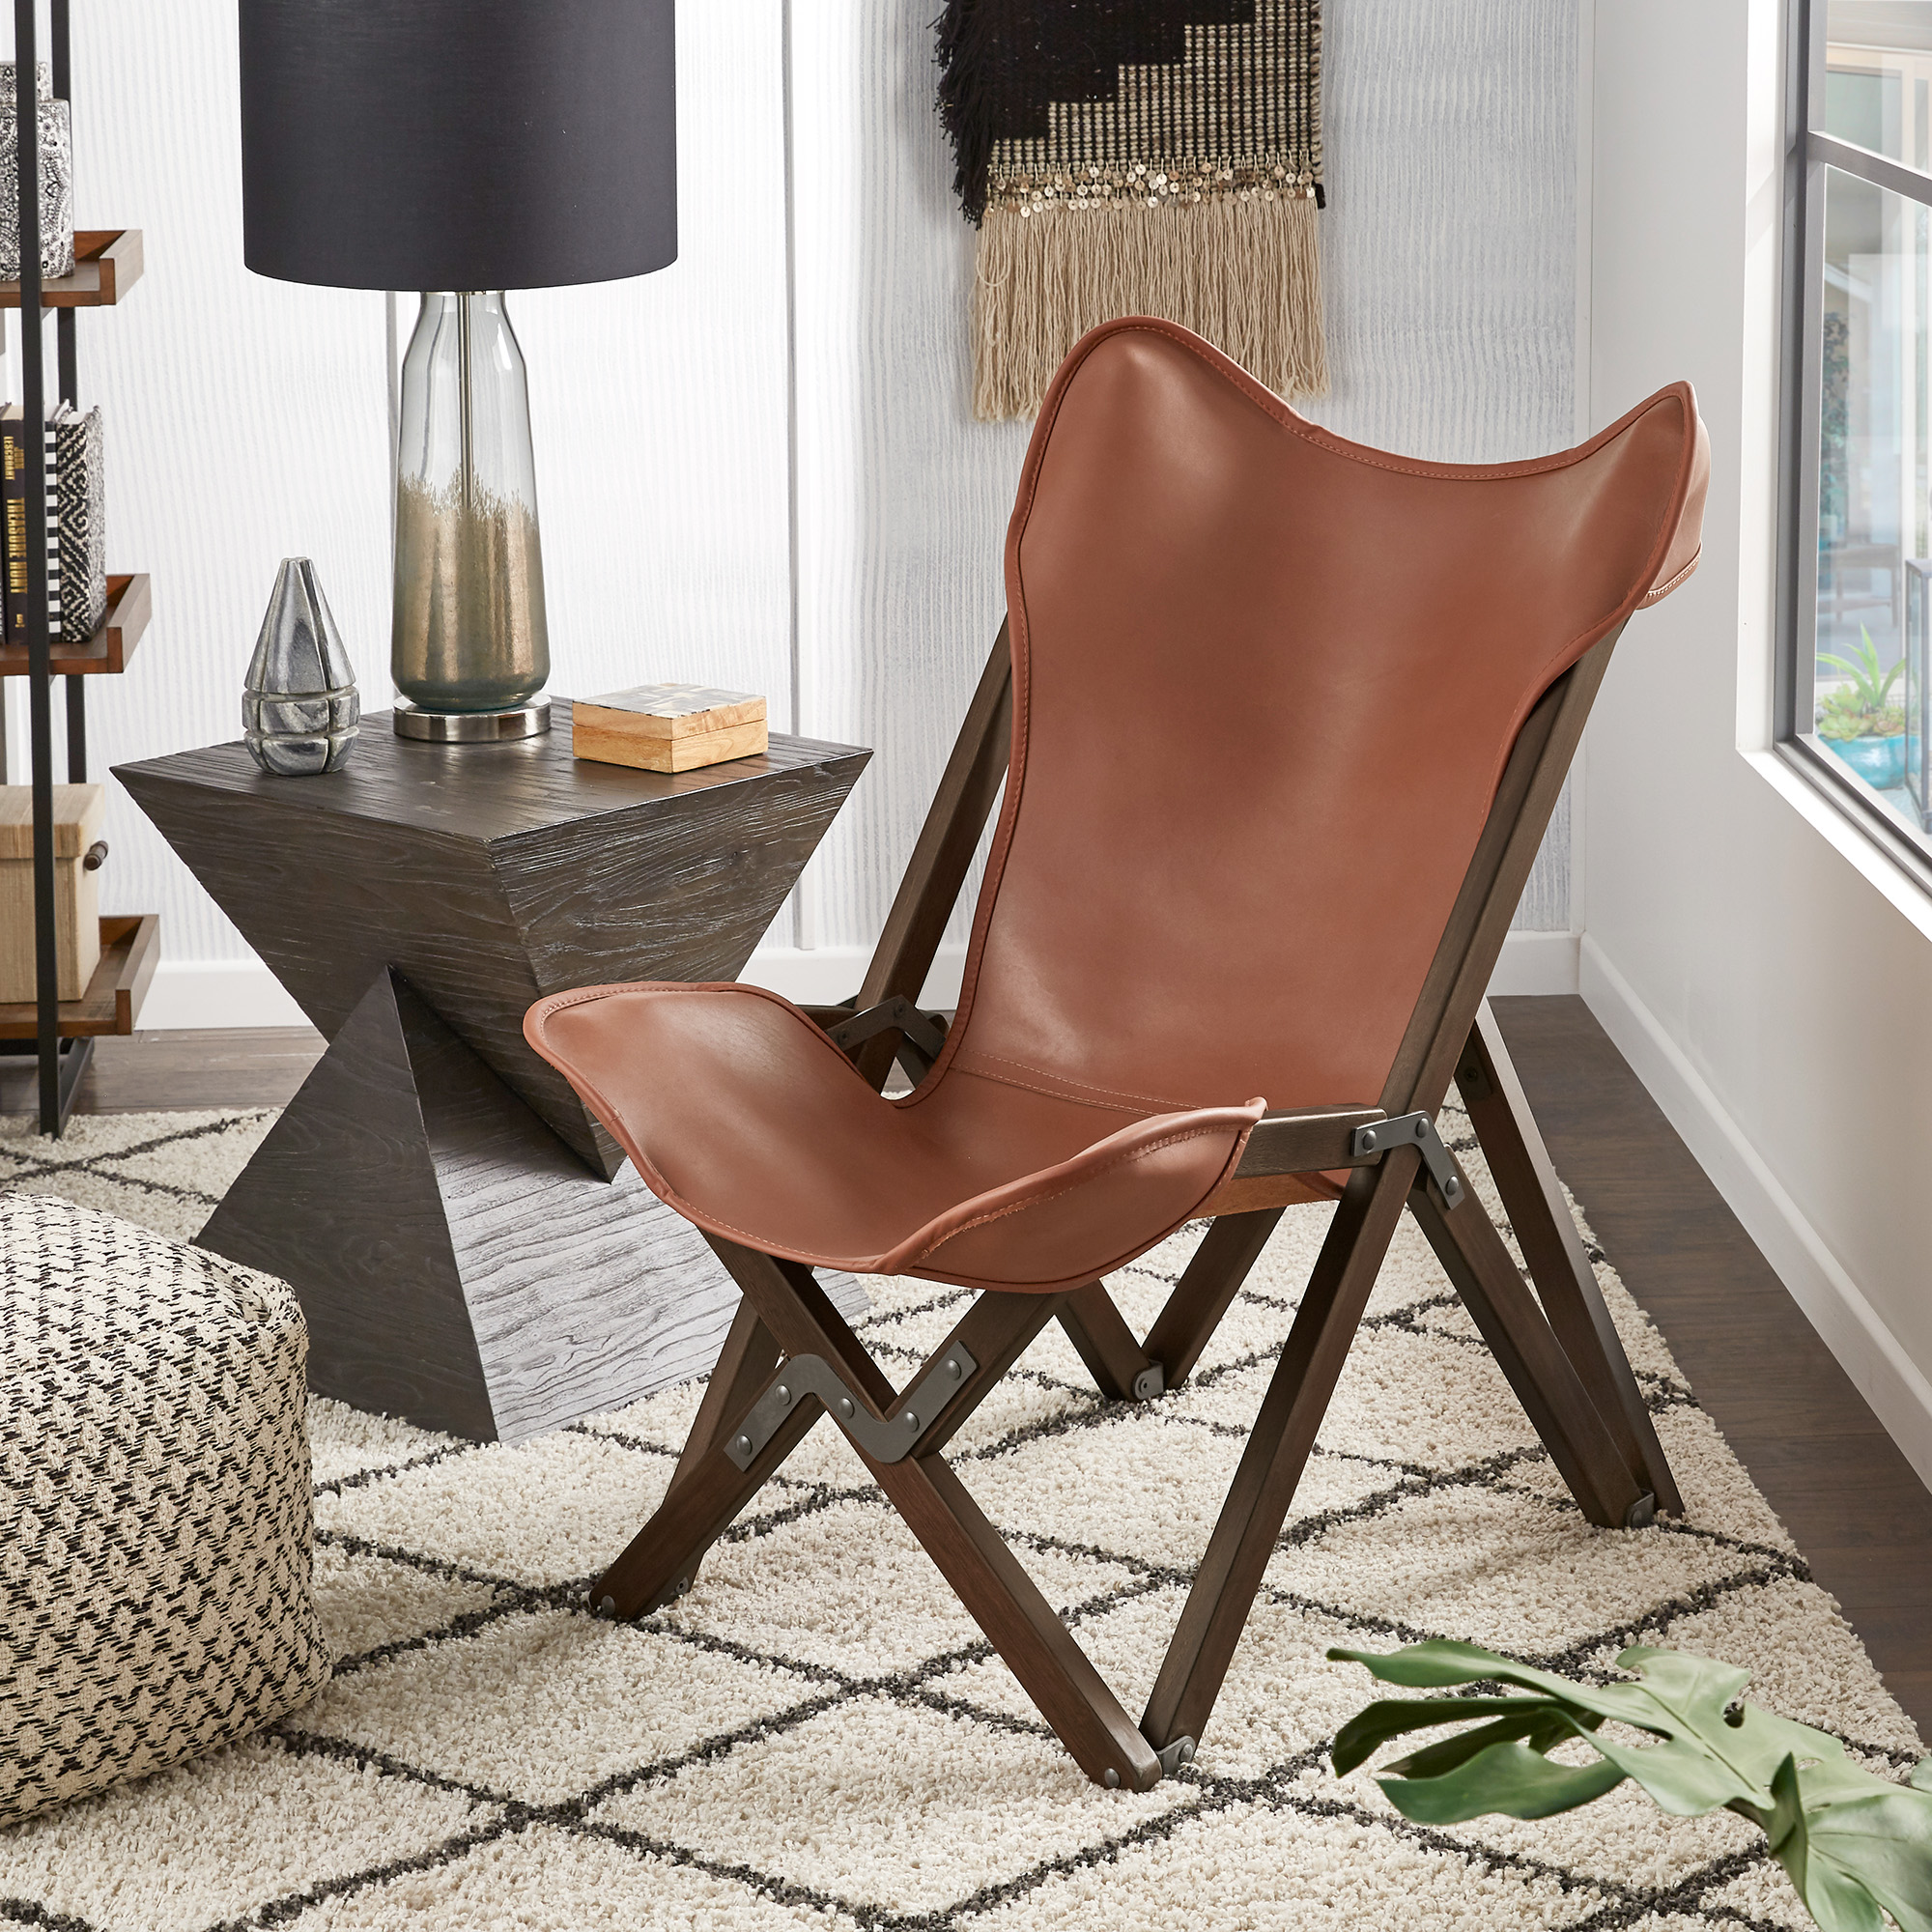 Genuine Top Grain Leather Tripolina Sling Chair